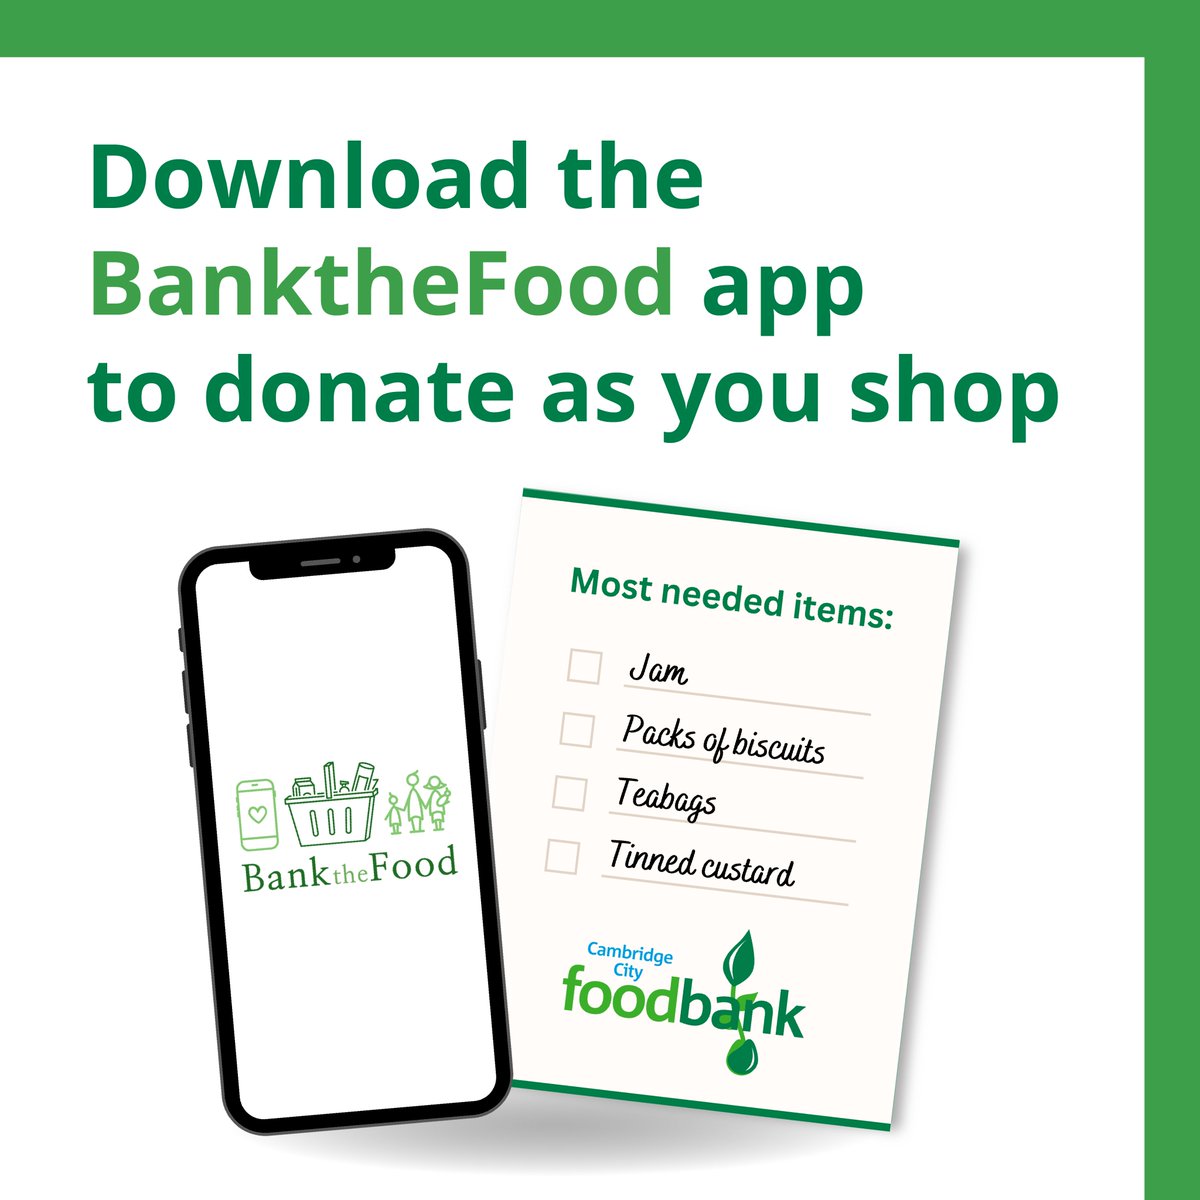 We recently signed up to @bankthefood! By using this app, you’ll be able to access our most needed items shopping list as you shop, making it easier than ever to support us 💚 Right now, the app shows that we’re in need of a few things…